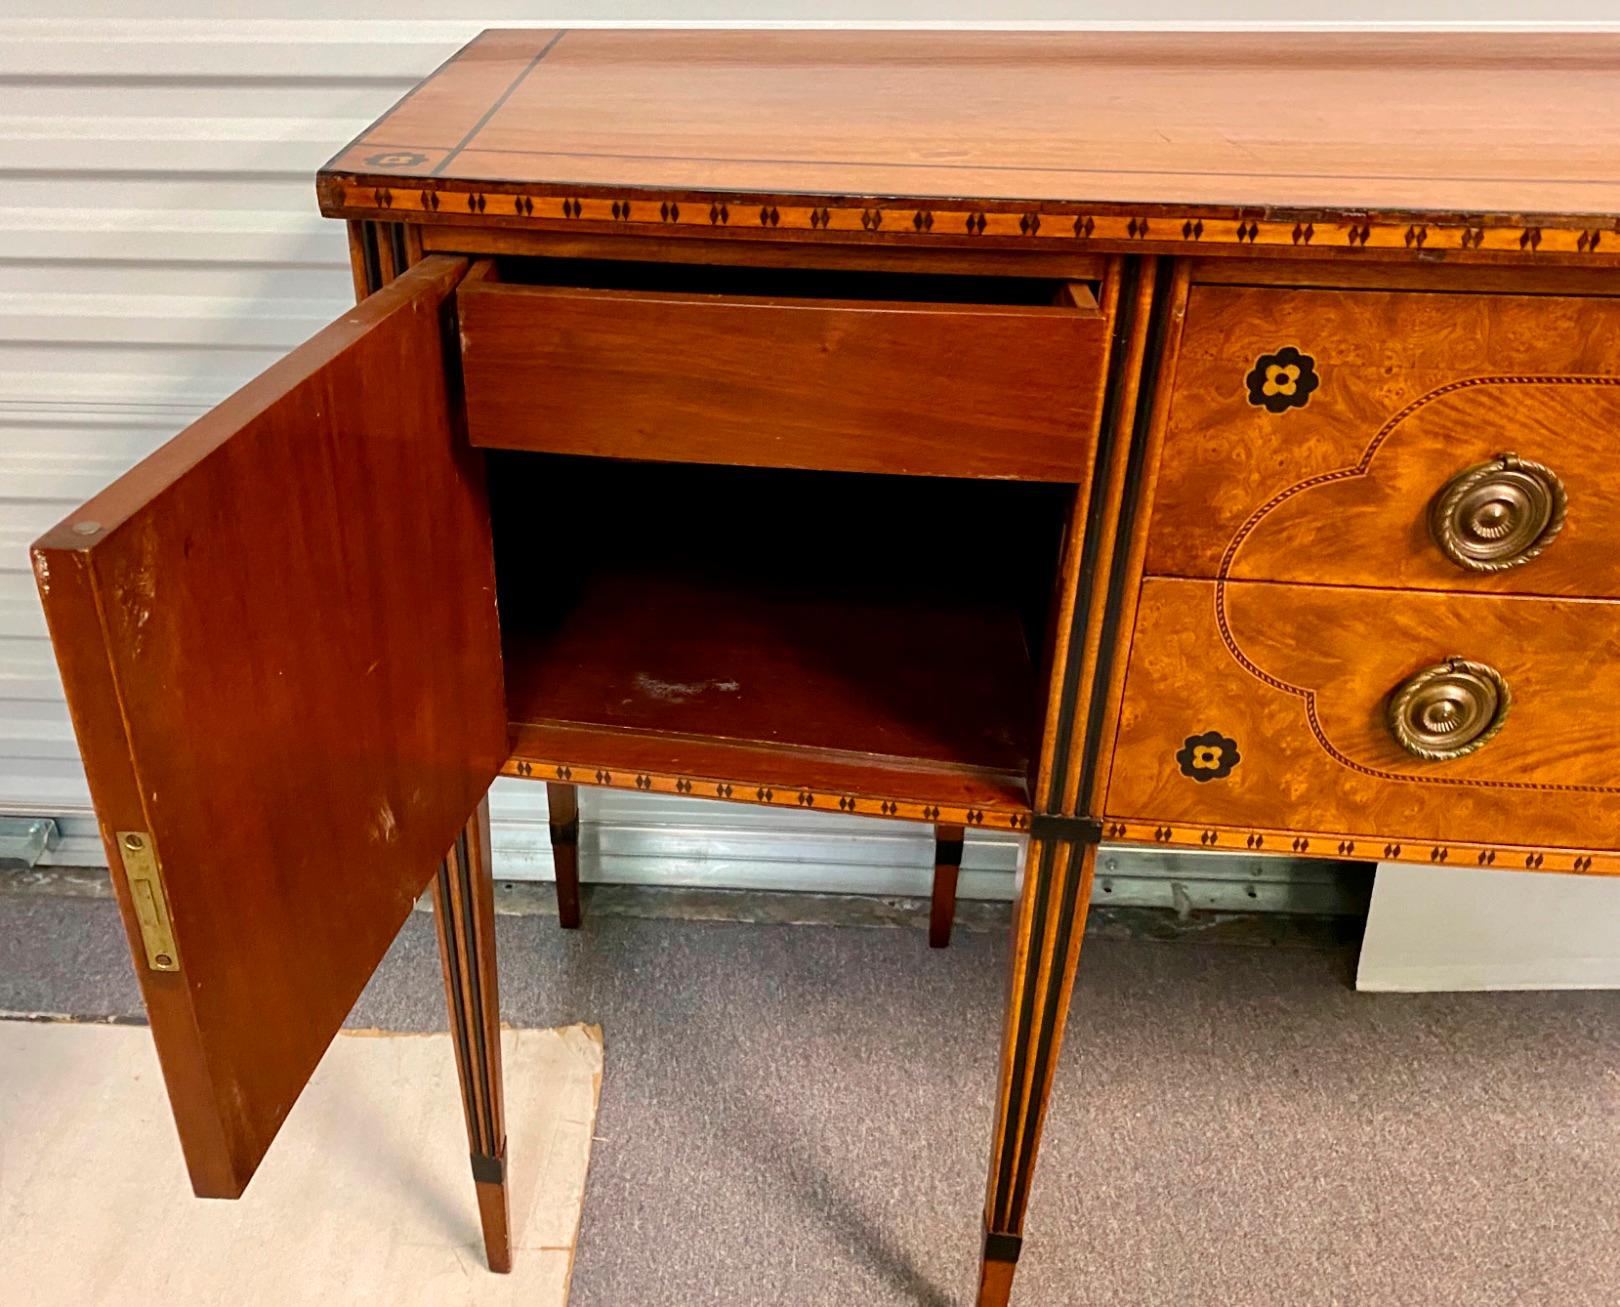 This is a wonderful piece. It is an early 20th century Robert Irwin for Royal Furniture sideboard. It has both satinwood and ebonized inlay. It is marked in the drawer and includes the keys. The long, tapered legs are also inlaid.